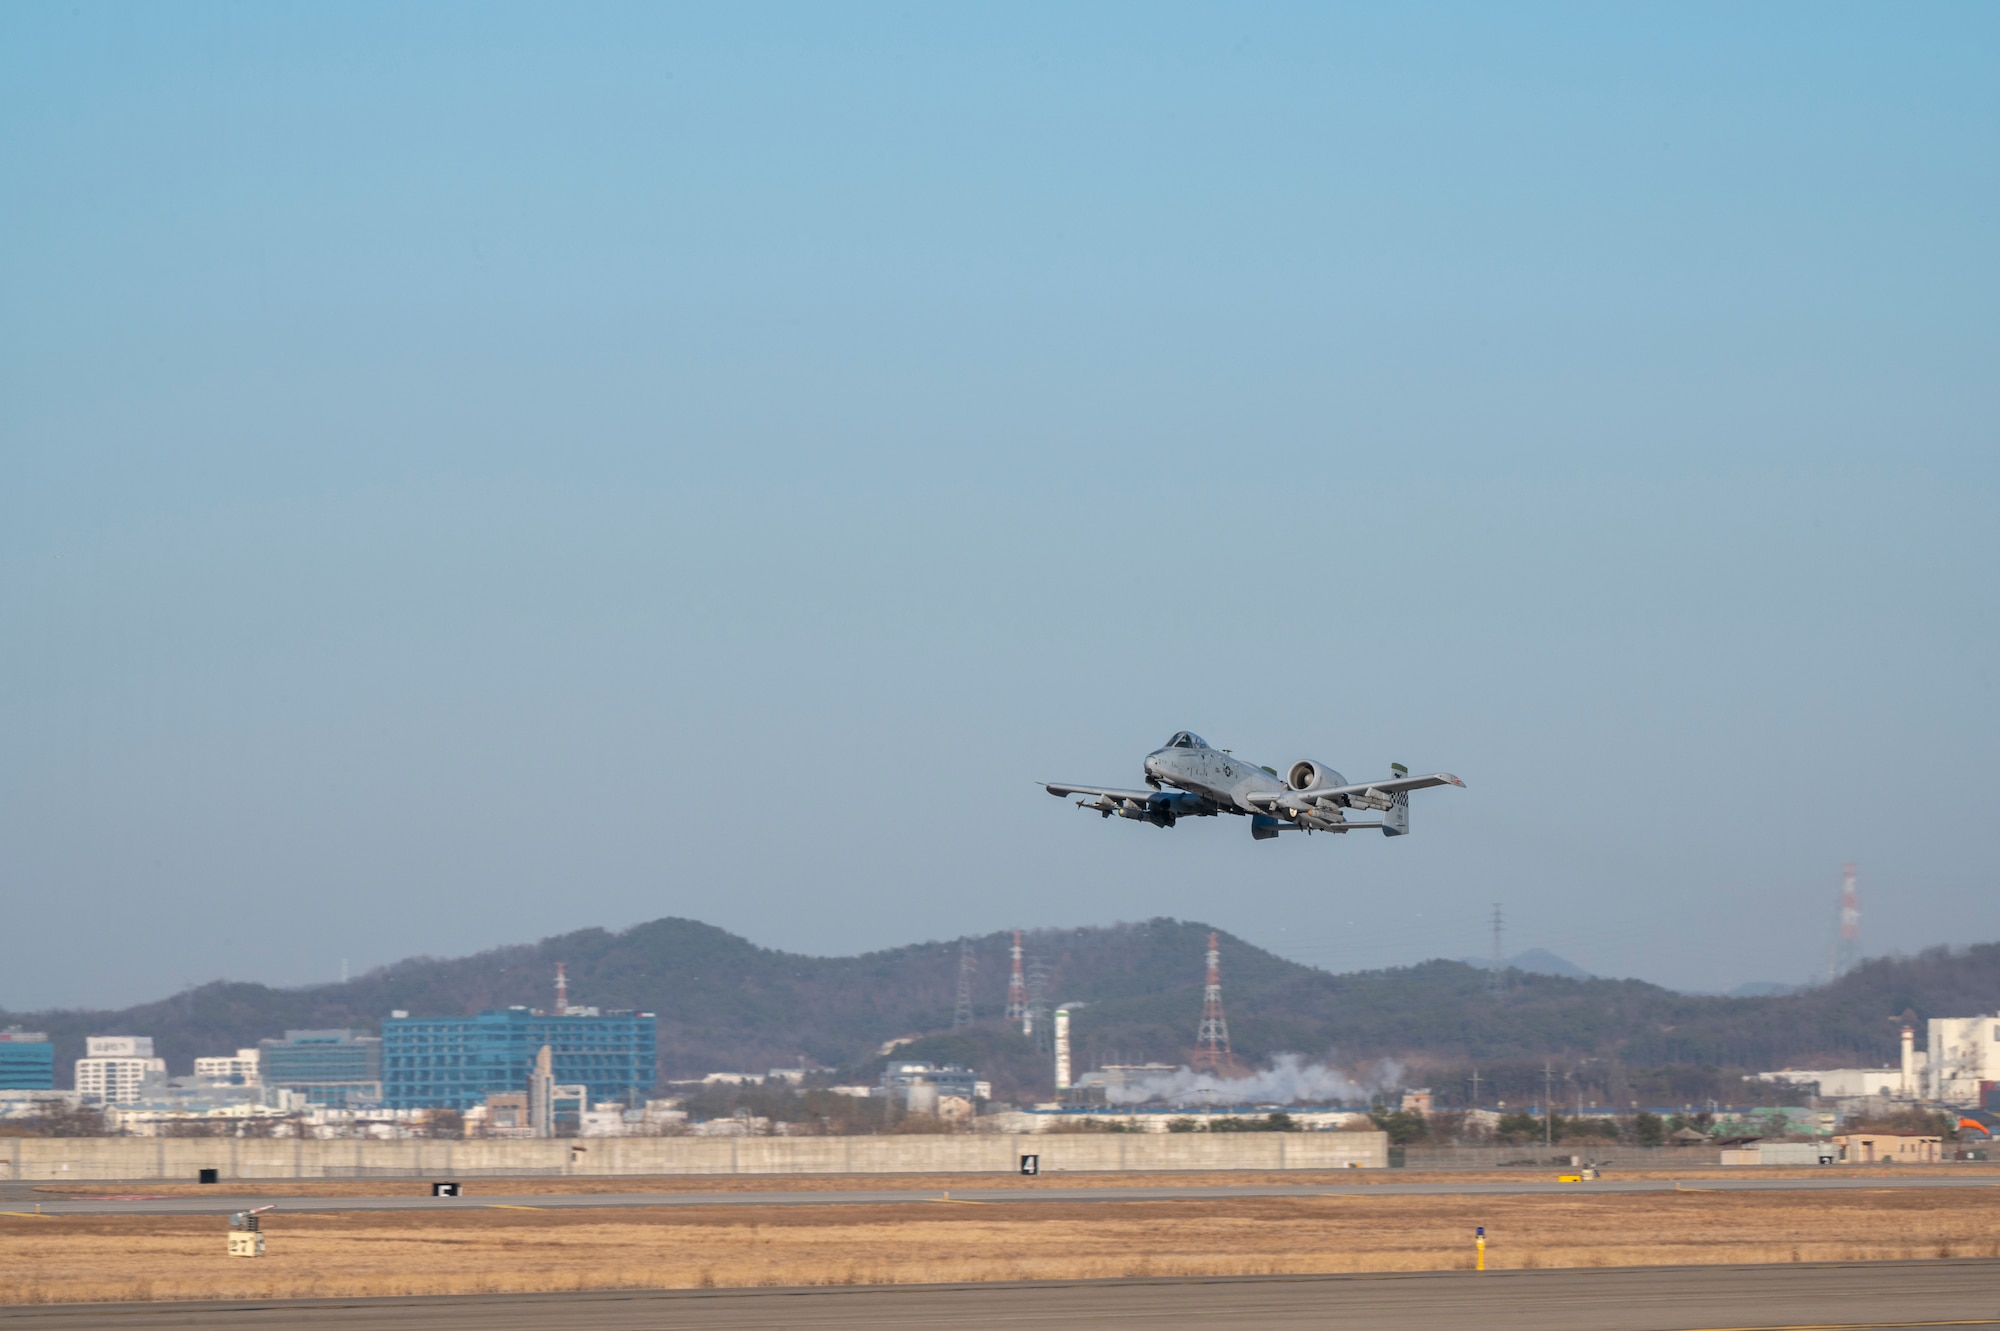 An A-10C Thunderbolt II assigned to the 25th Fighter Squadron takes off at Osan Air Base, Republic of Korea, Jan. 30, 2023. The routine training event is designed to test Osan Airmen’s ability during a heightened state of readiness while providing combat ready forces for close air support, air strike control, forward air control-airborne, combat search and rescue, counter air and fire, and interdiction in the defense of the ROK. (U.S. Air Force Photo by Airman 1st Class Aaron Edwards)